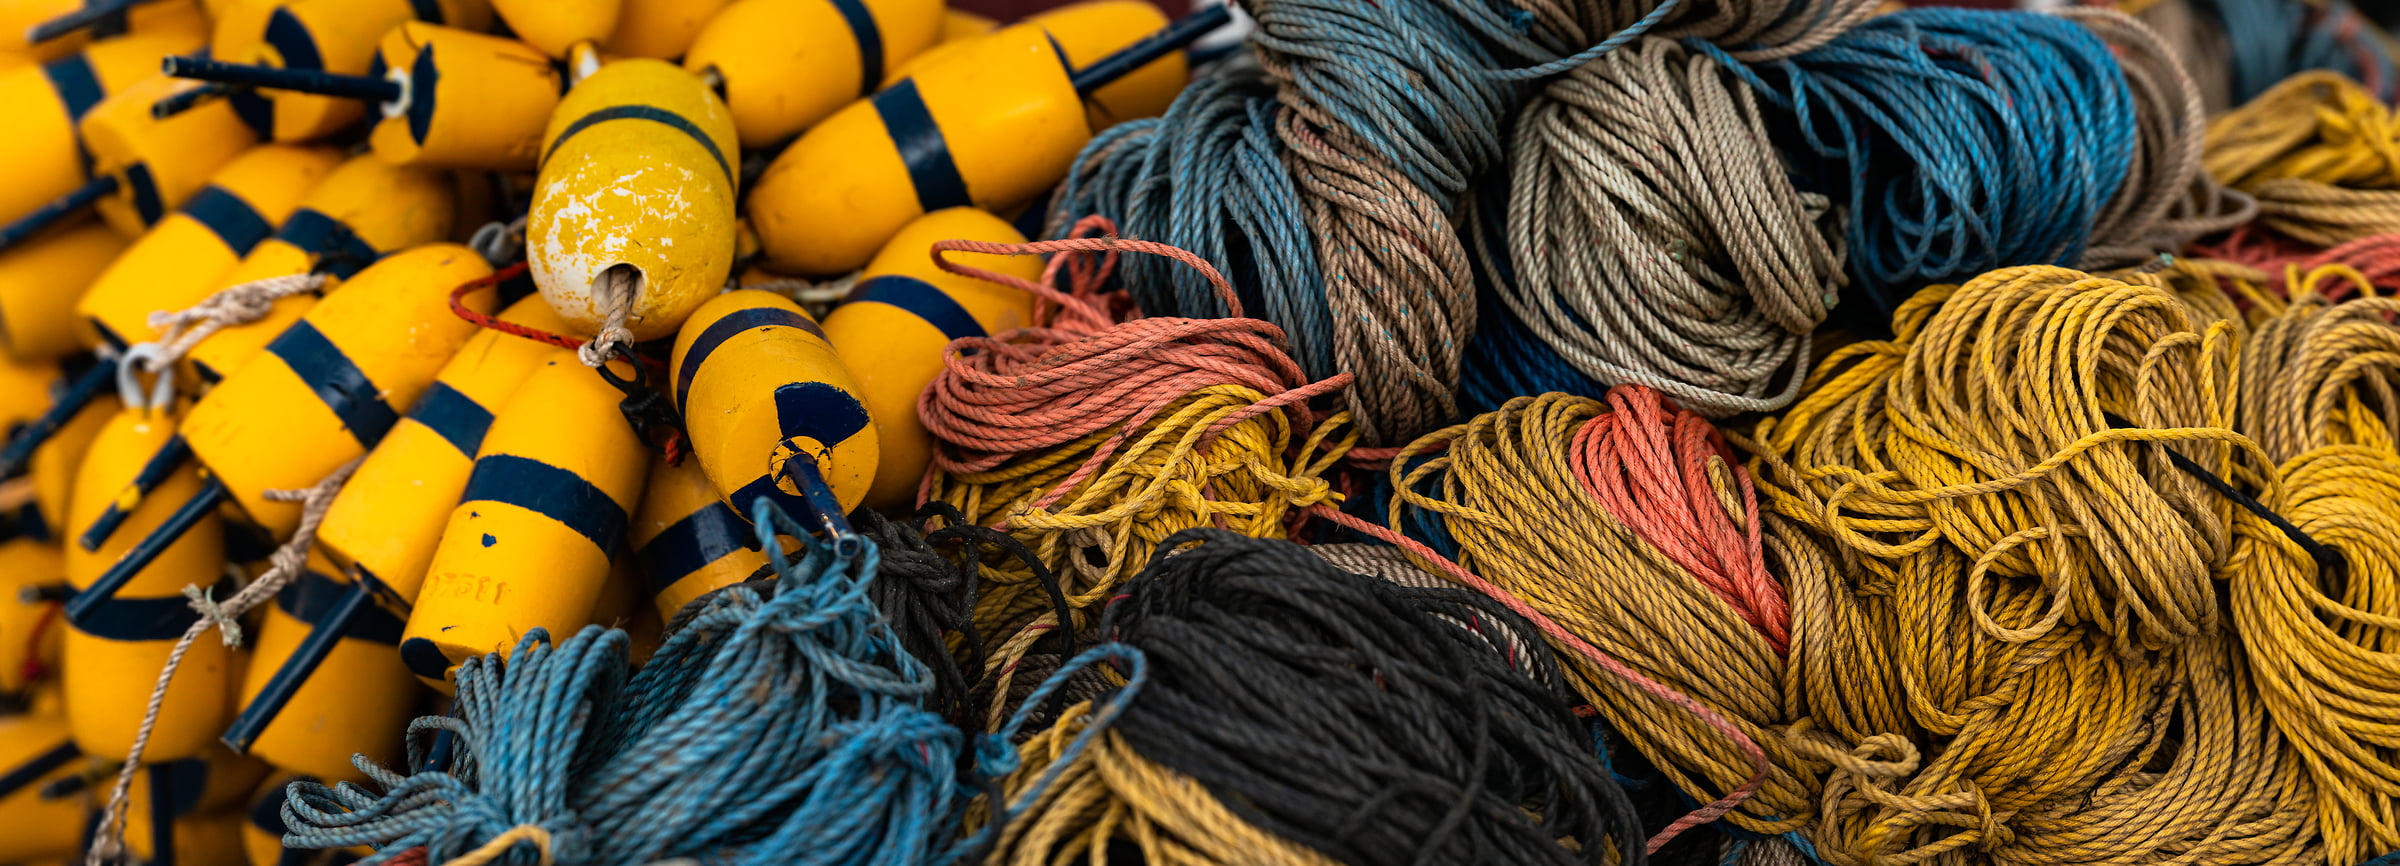 235 megapixels! A very high resolution, large-format VAST photo print of buoys and ropes; fine art photograph created by Aaron Priest in Baldwin Corners, Bernard, Maine